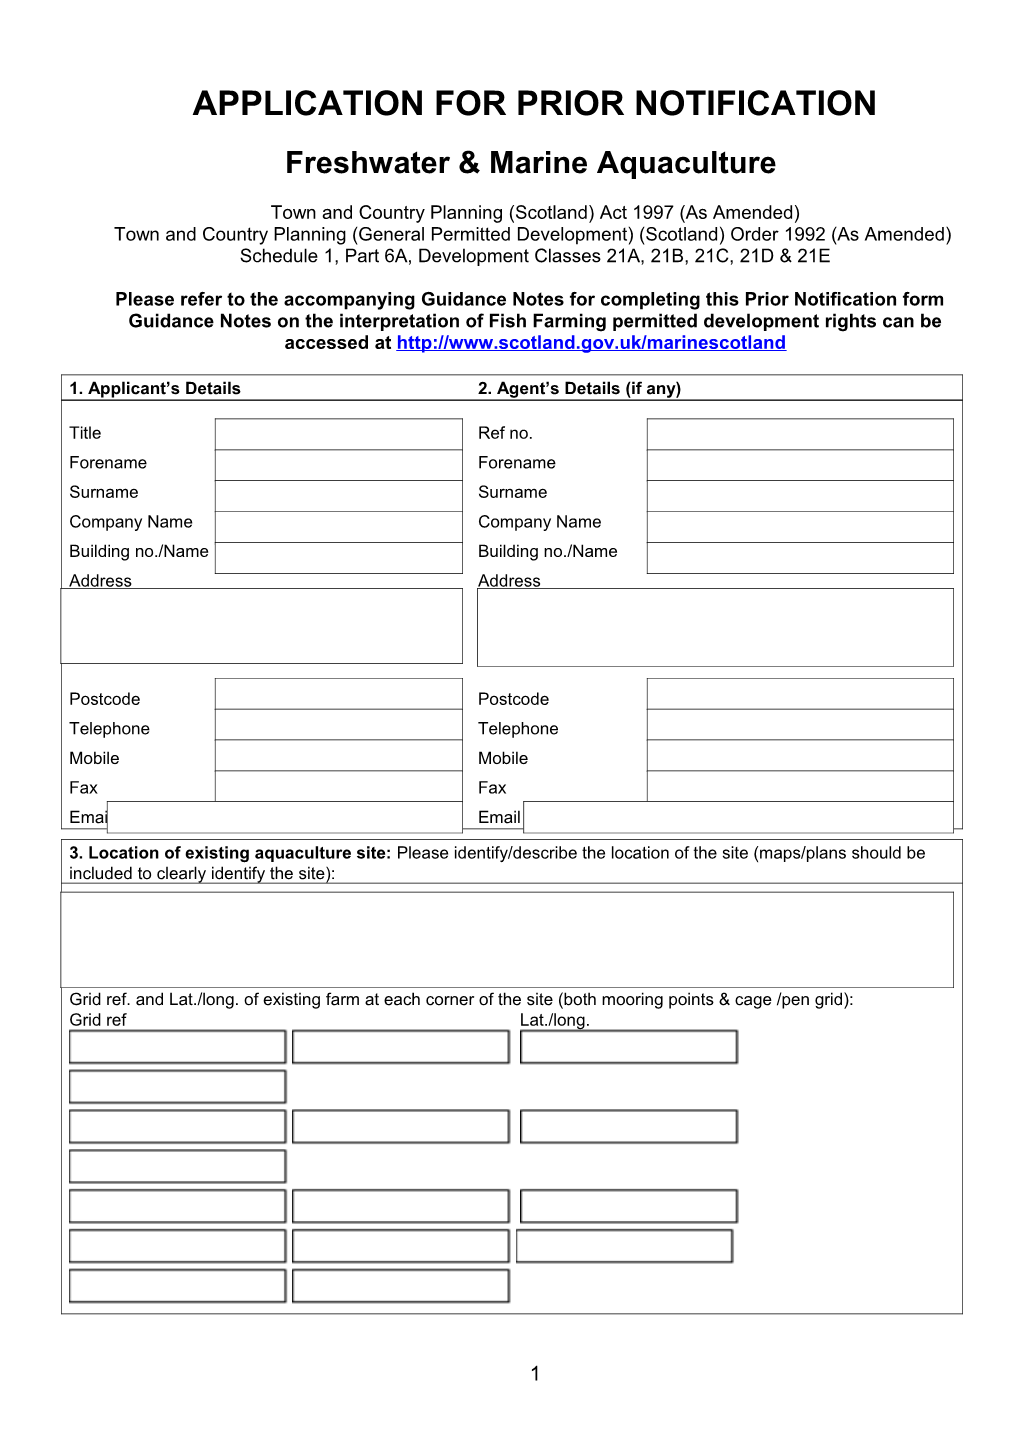 Application for Prior Notification